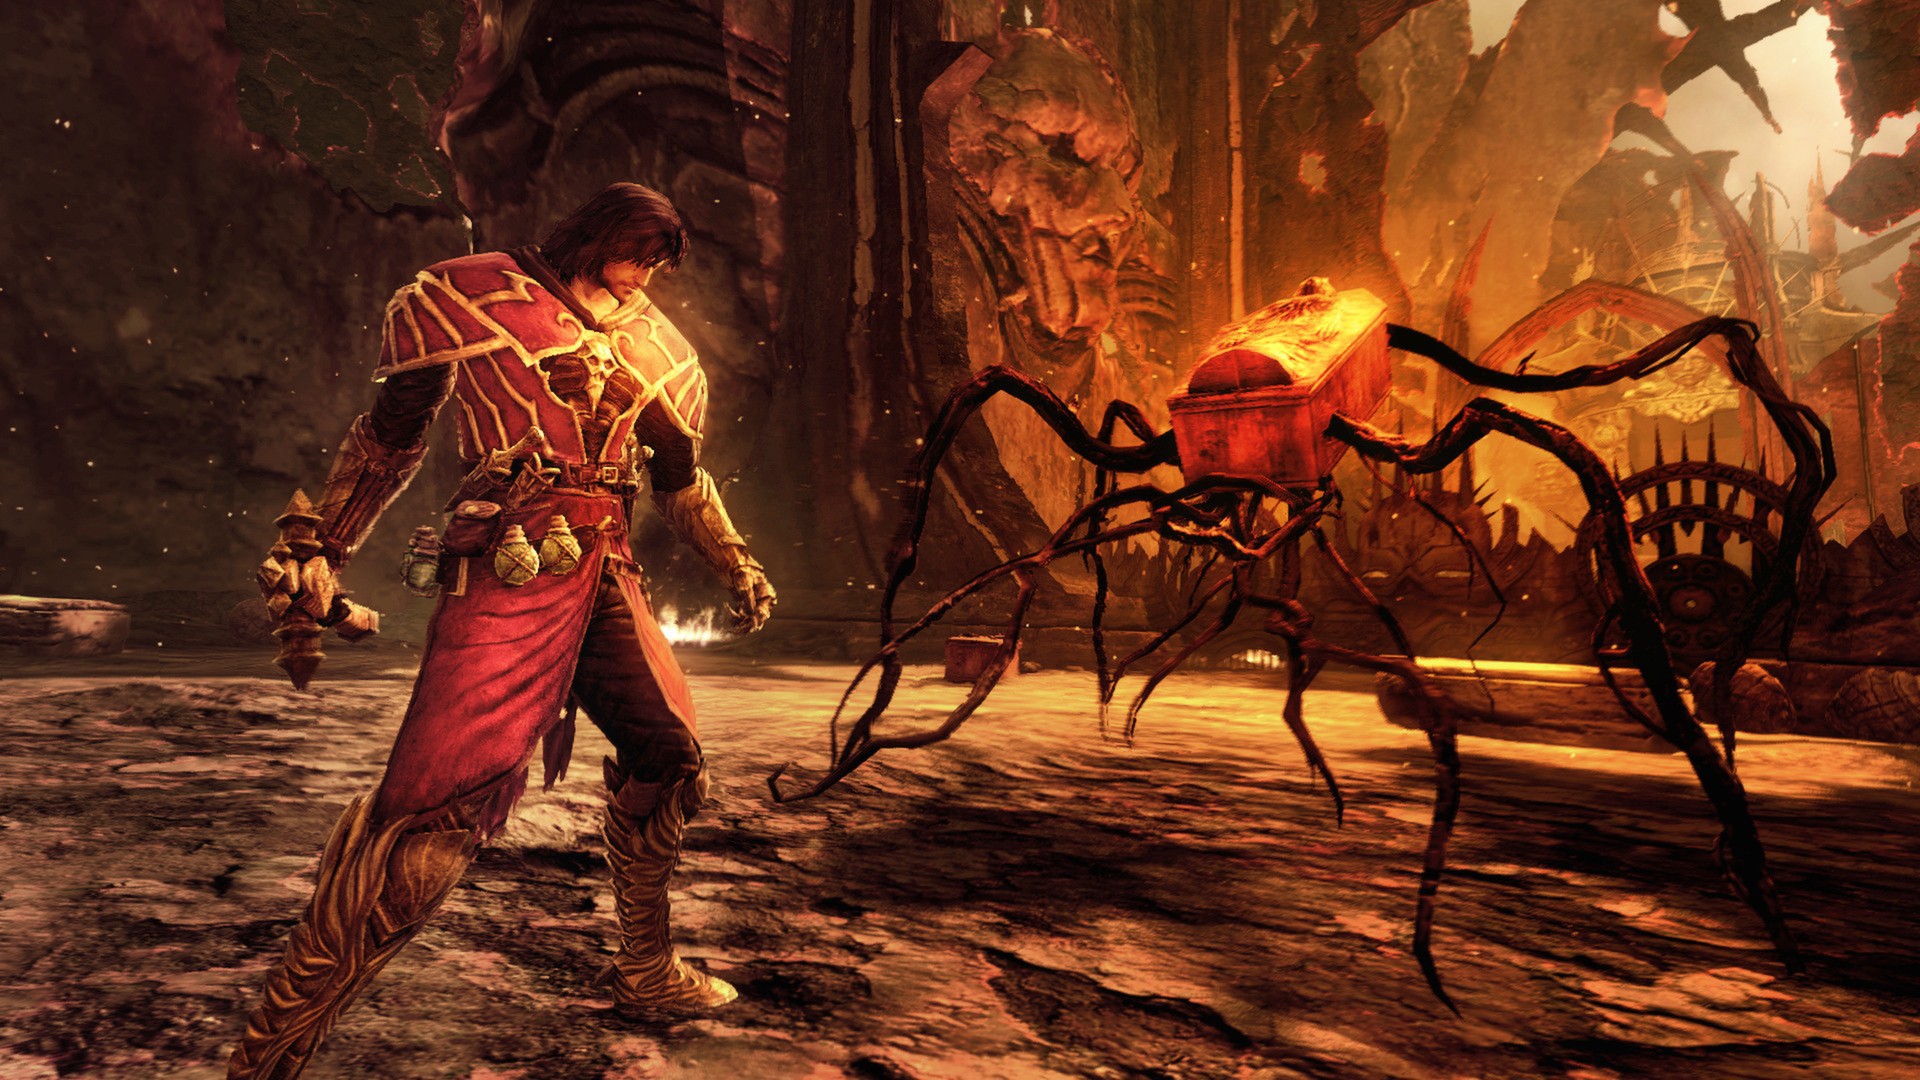 Video Game Sequels that aren't sequels  - Castlevania: Lords Of Shadow